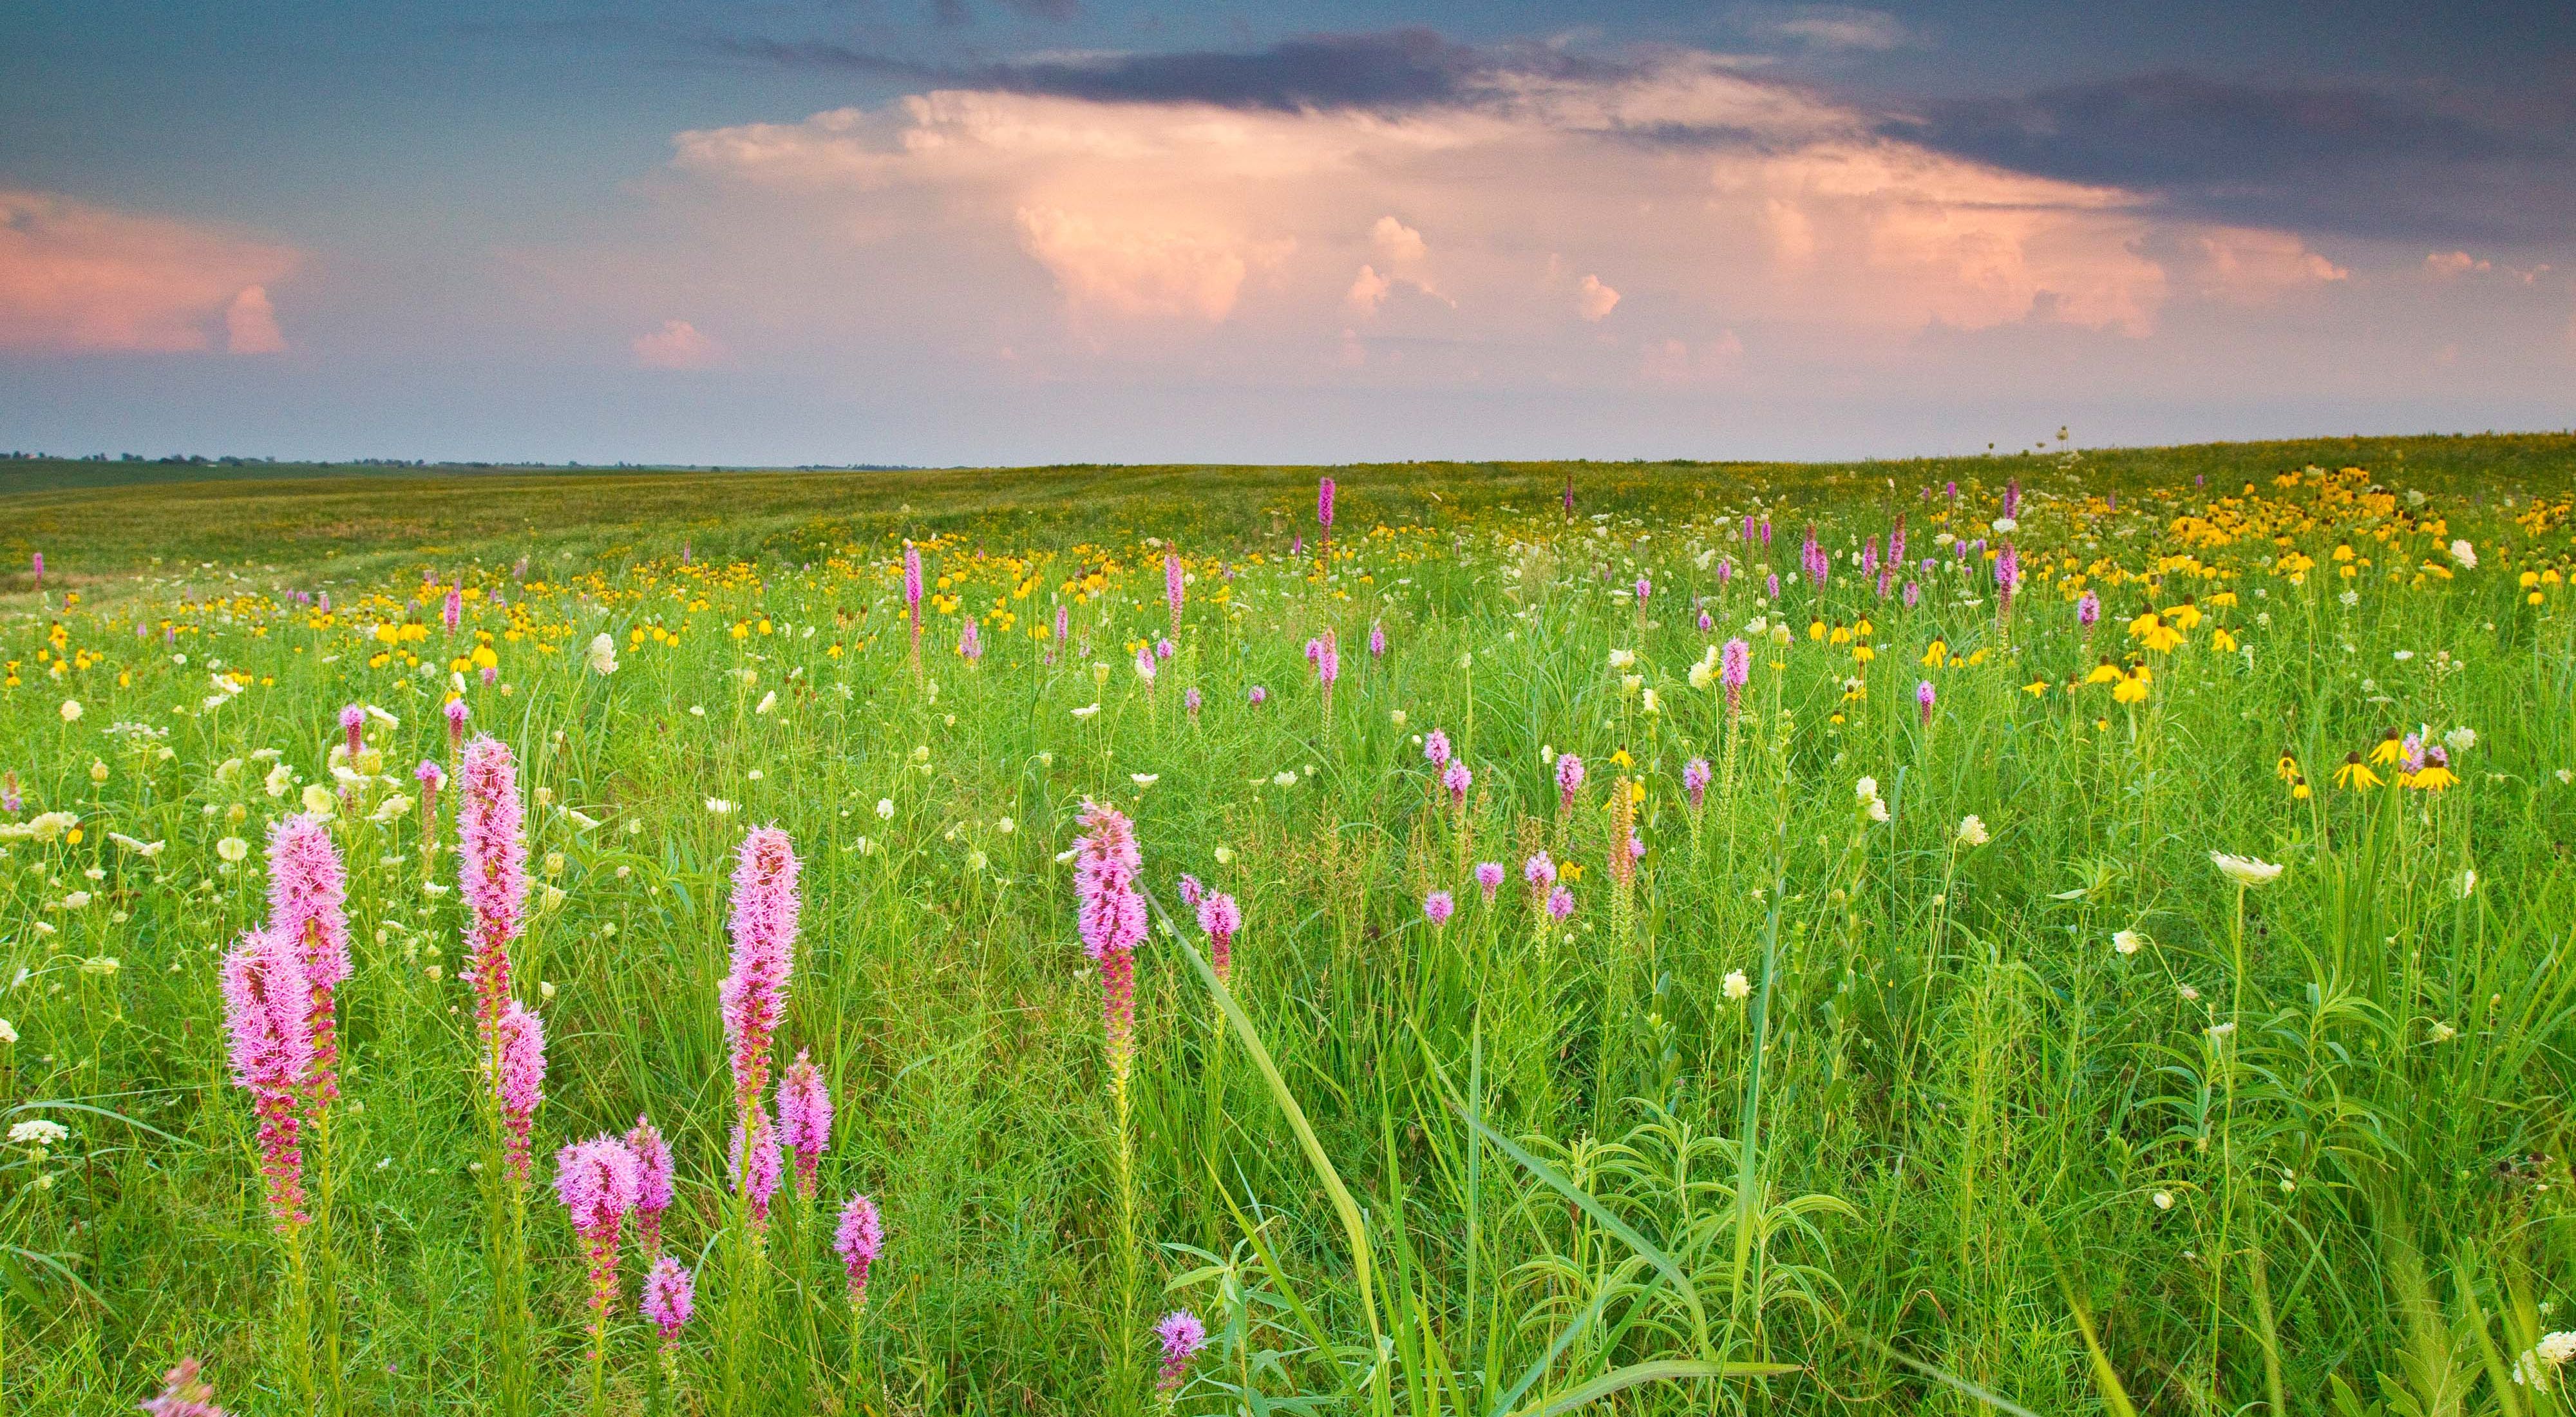 A field of purple, yellow and white wildflowers stretches to the horizon.